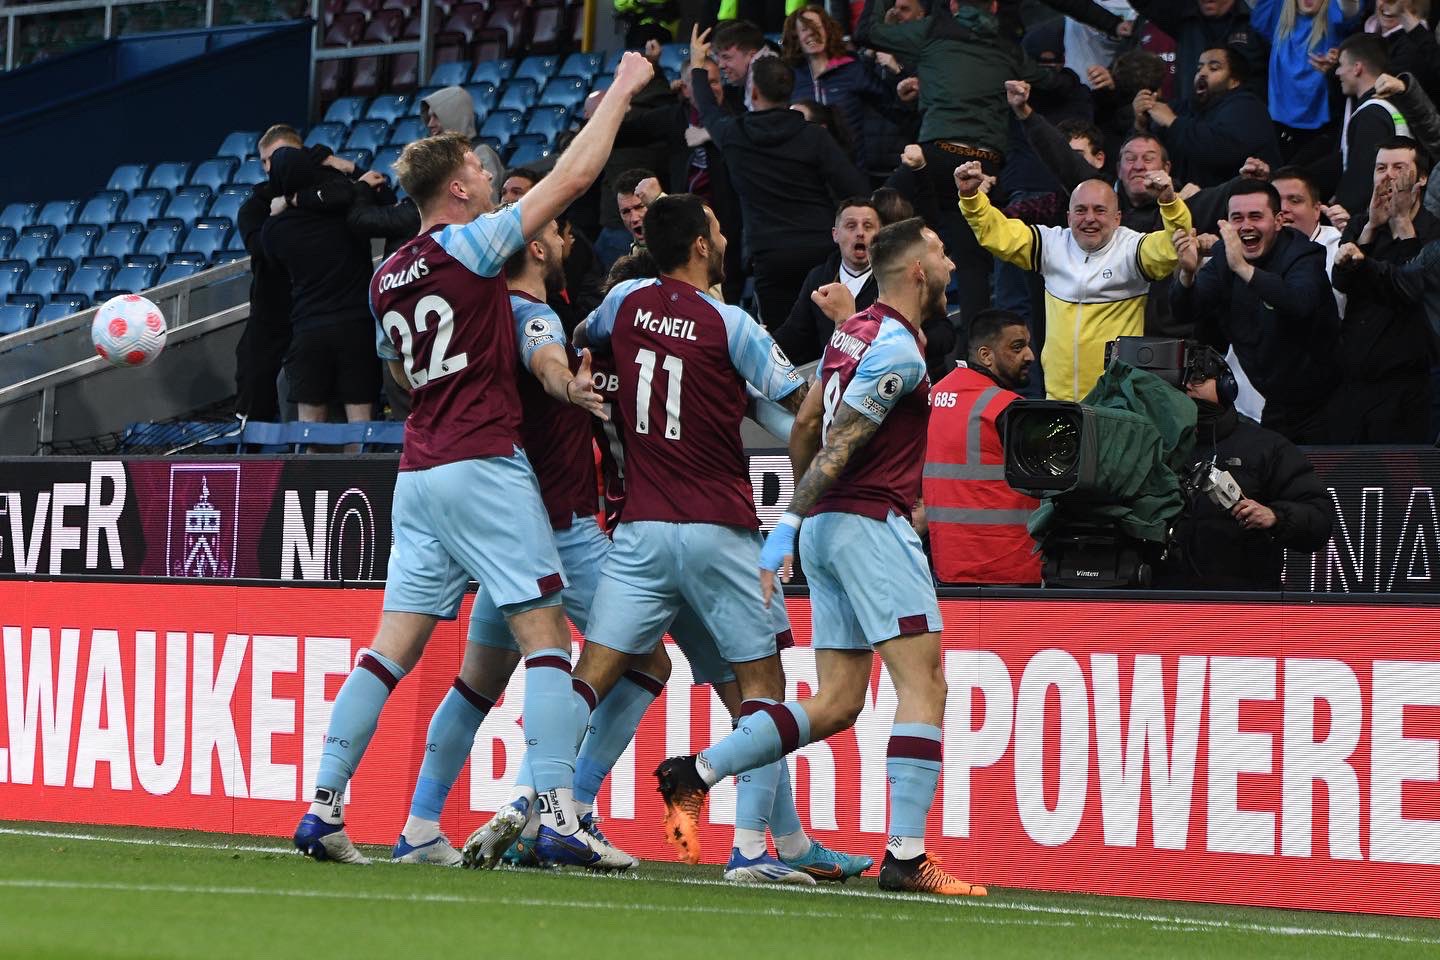 Burnley have given themselves a lifeline with Southampton win, claims Harry Redknapp